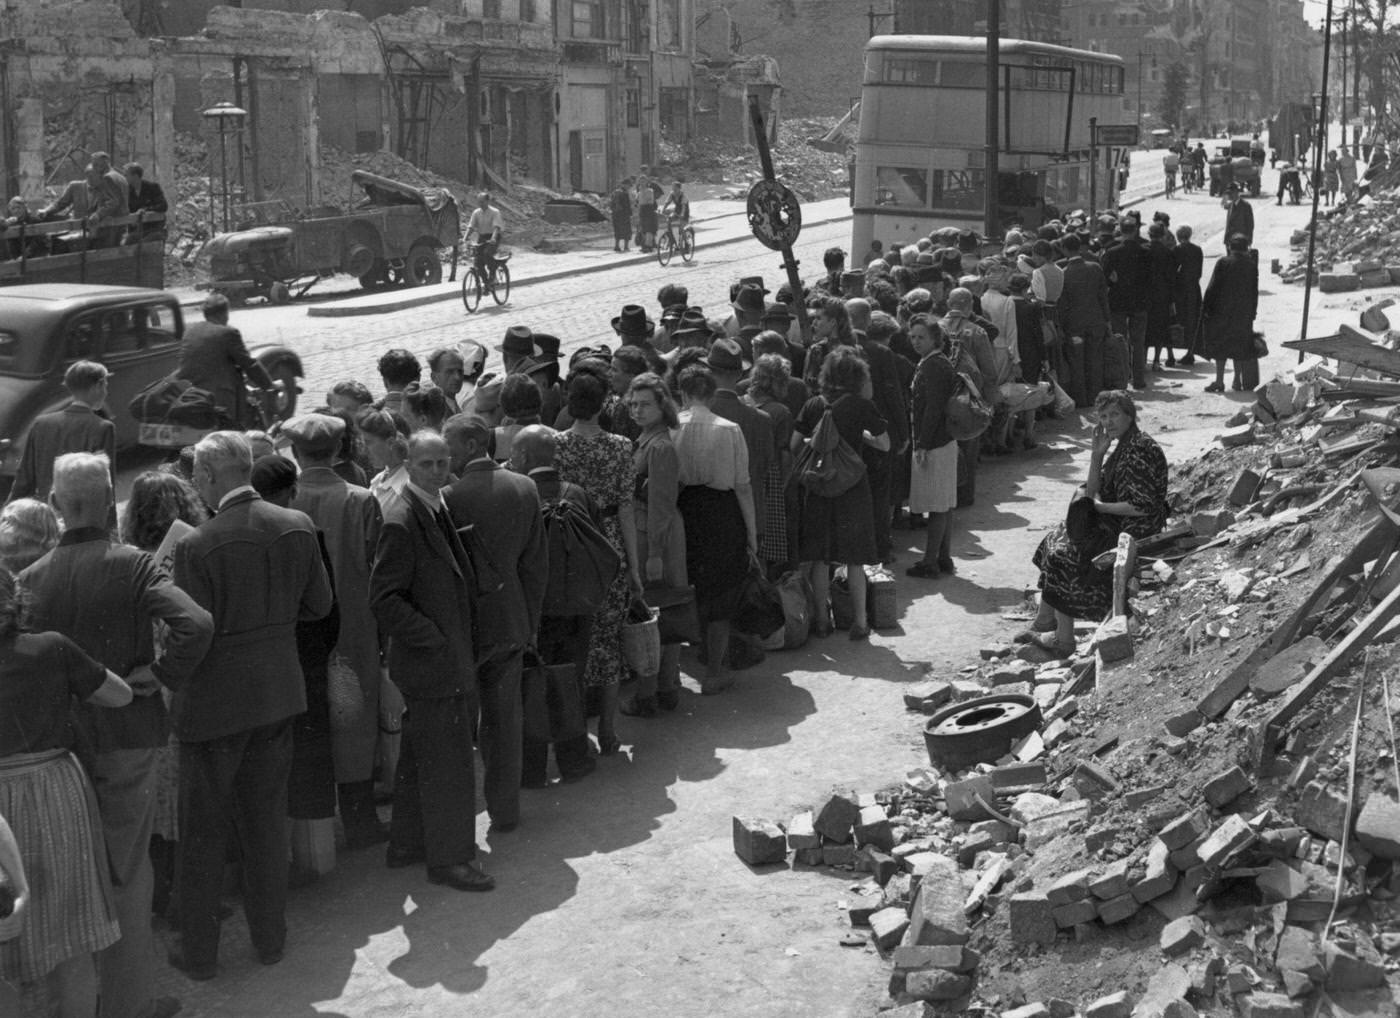 Bus queue in Berlin stands beside a pile of rubble at the end of World War II in Europe, 1945.